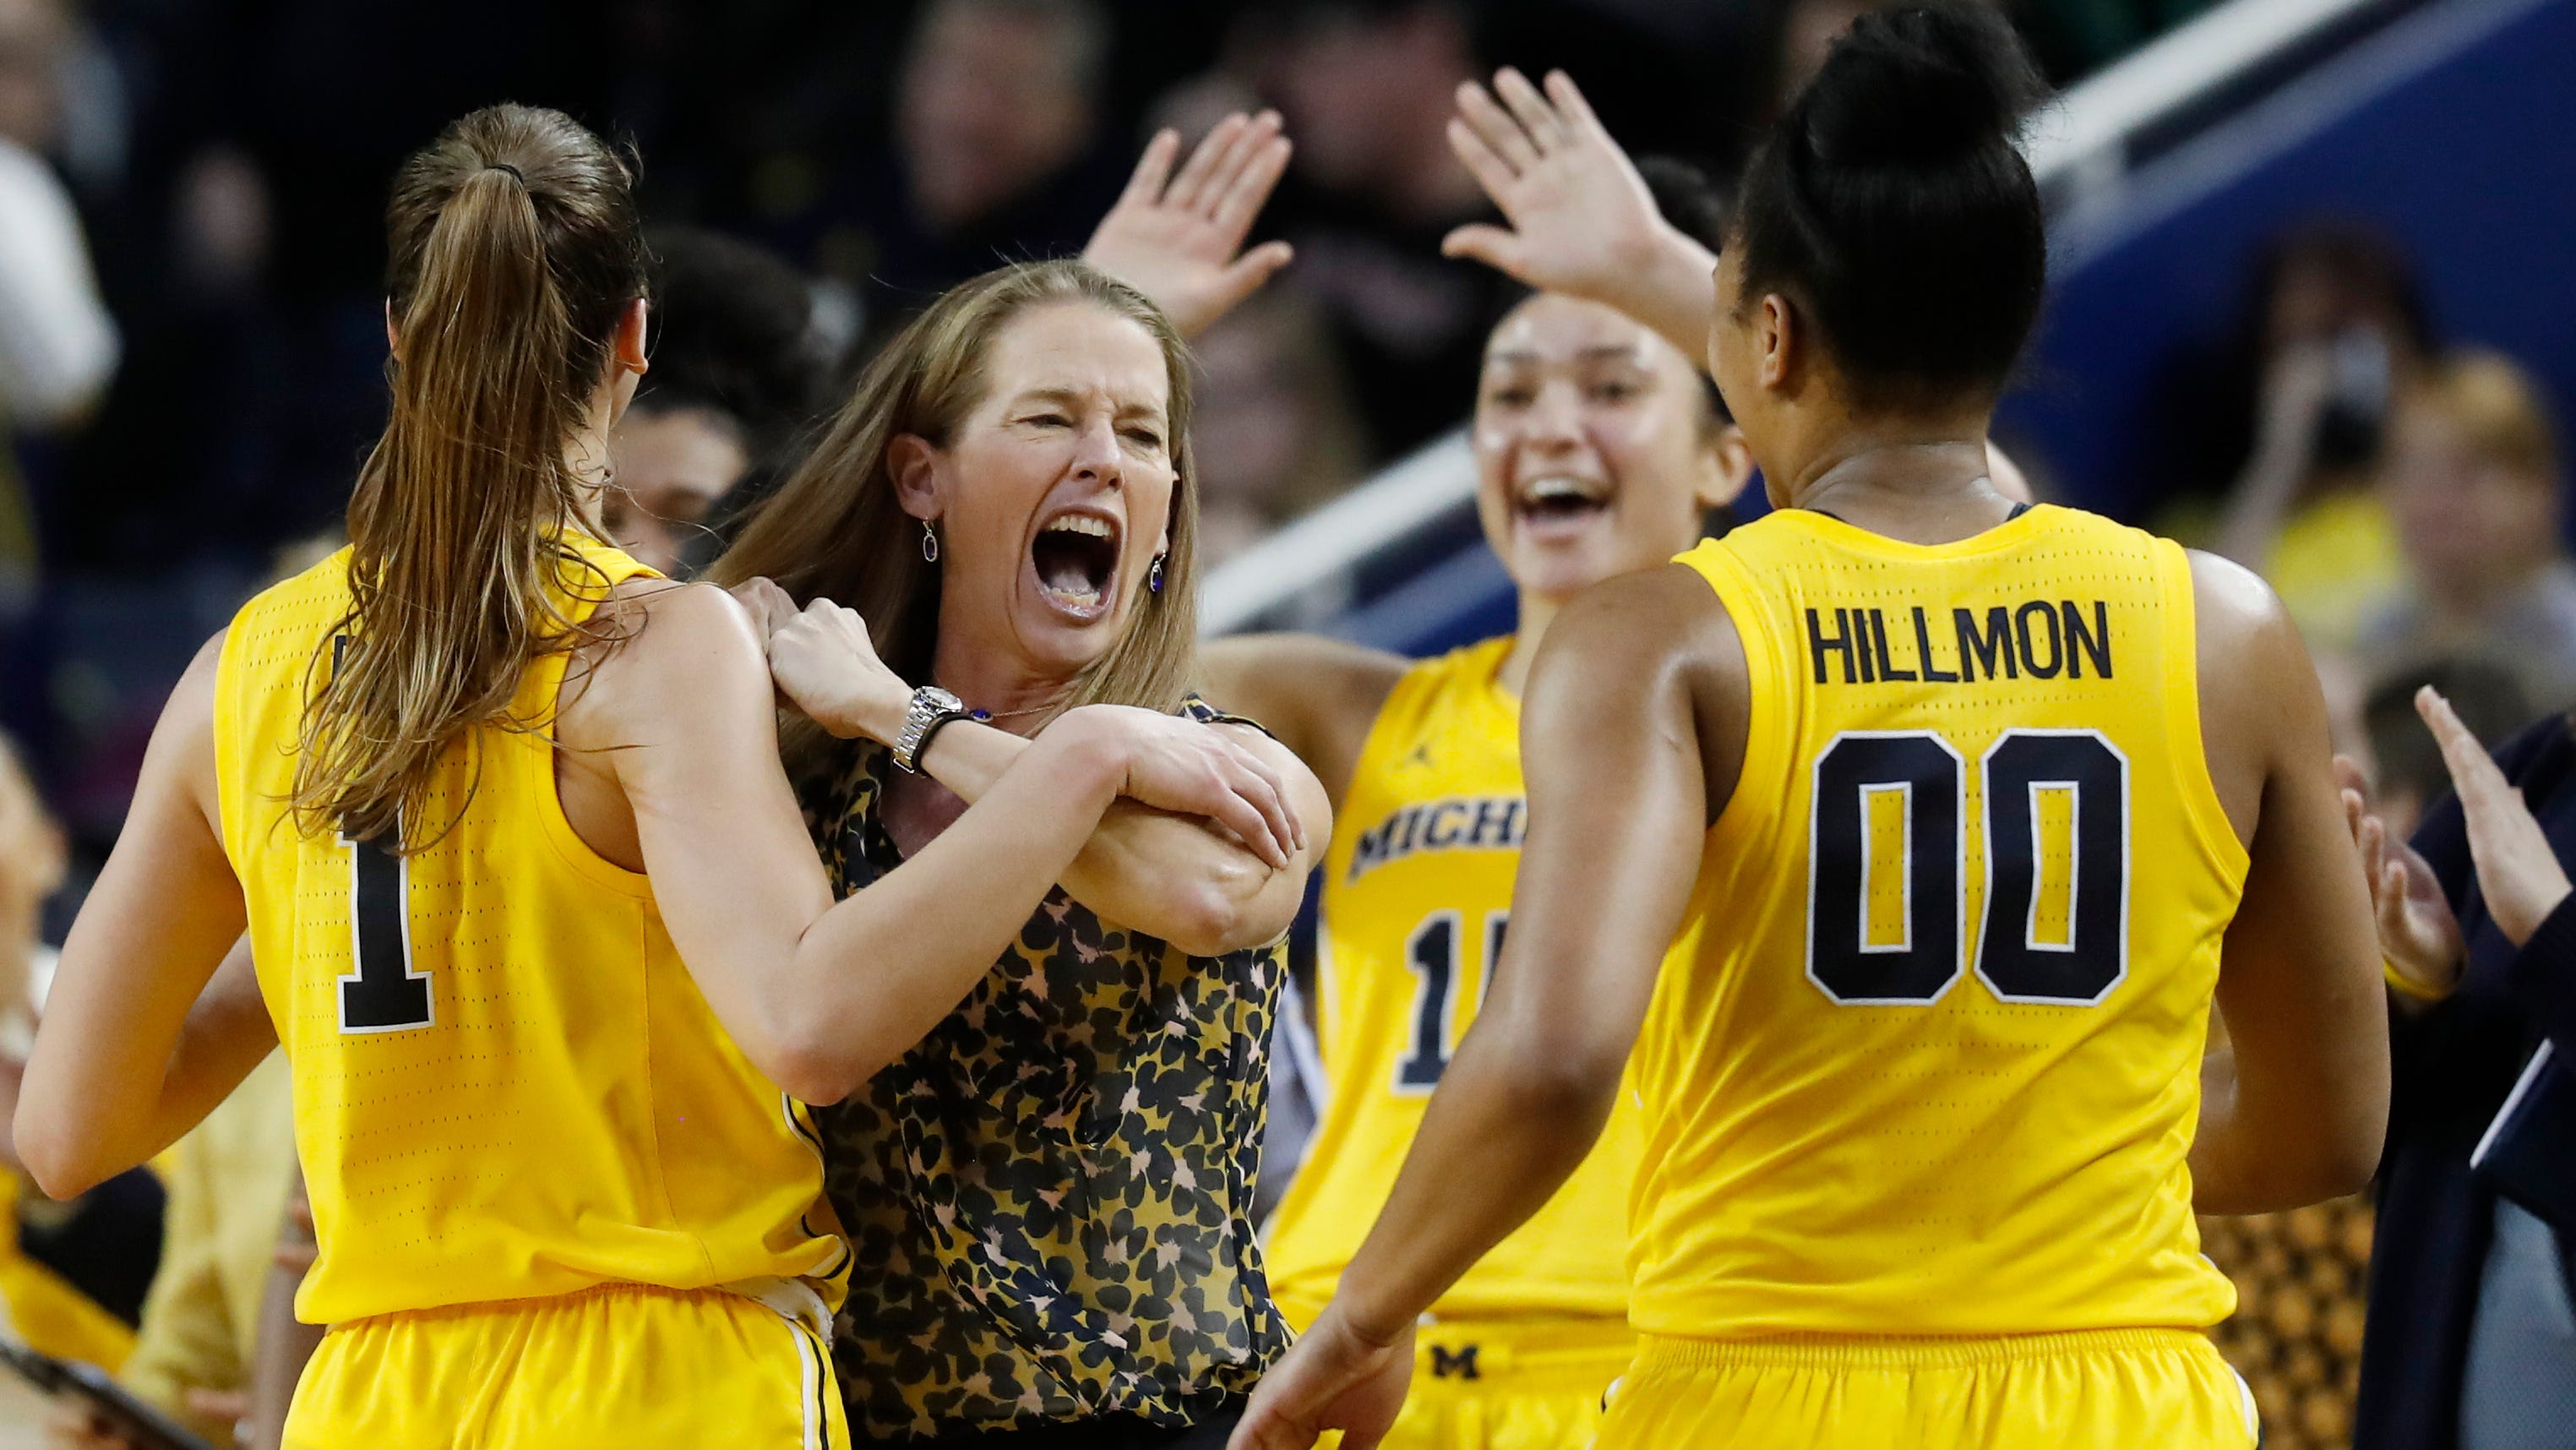 Michigan women's basketball postponed another game due to COVID19